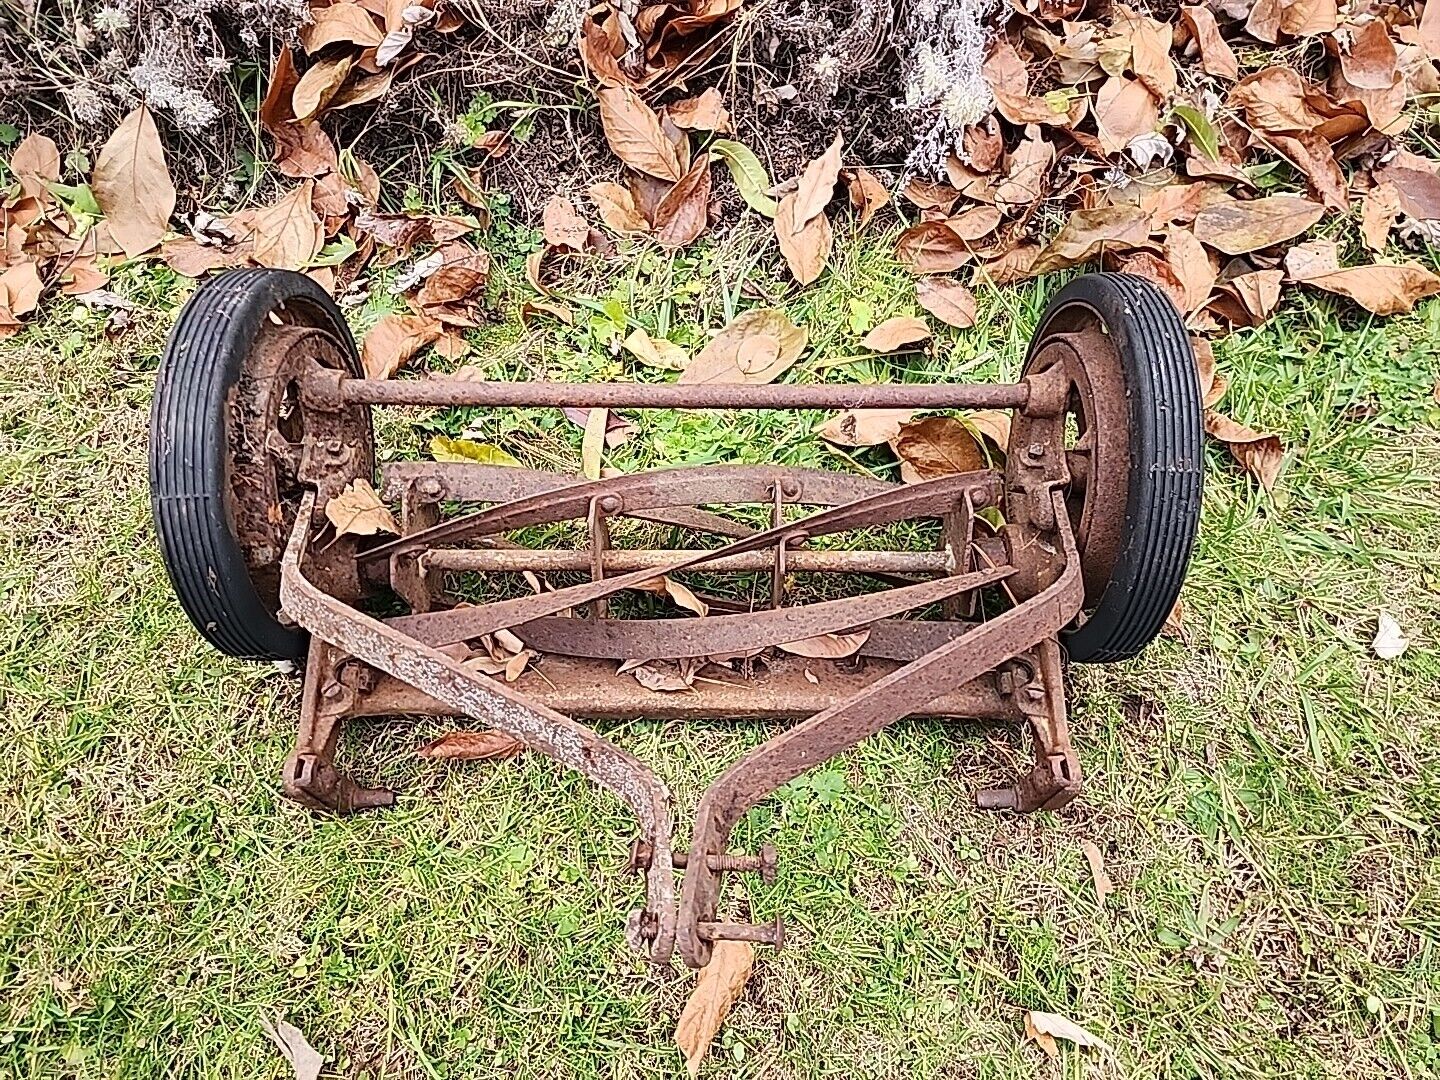 Vintage Antique Metal Push Grass Cutter Mower Model GREAT STATES 400